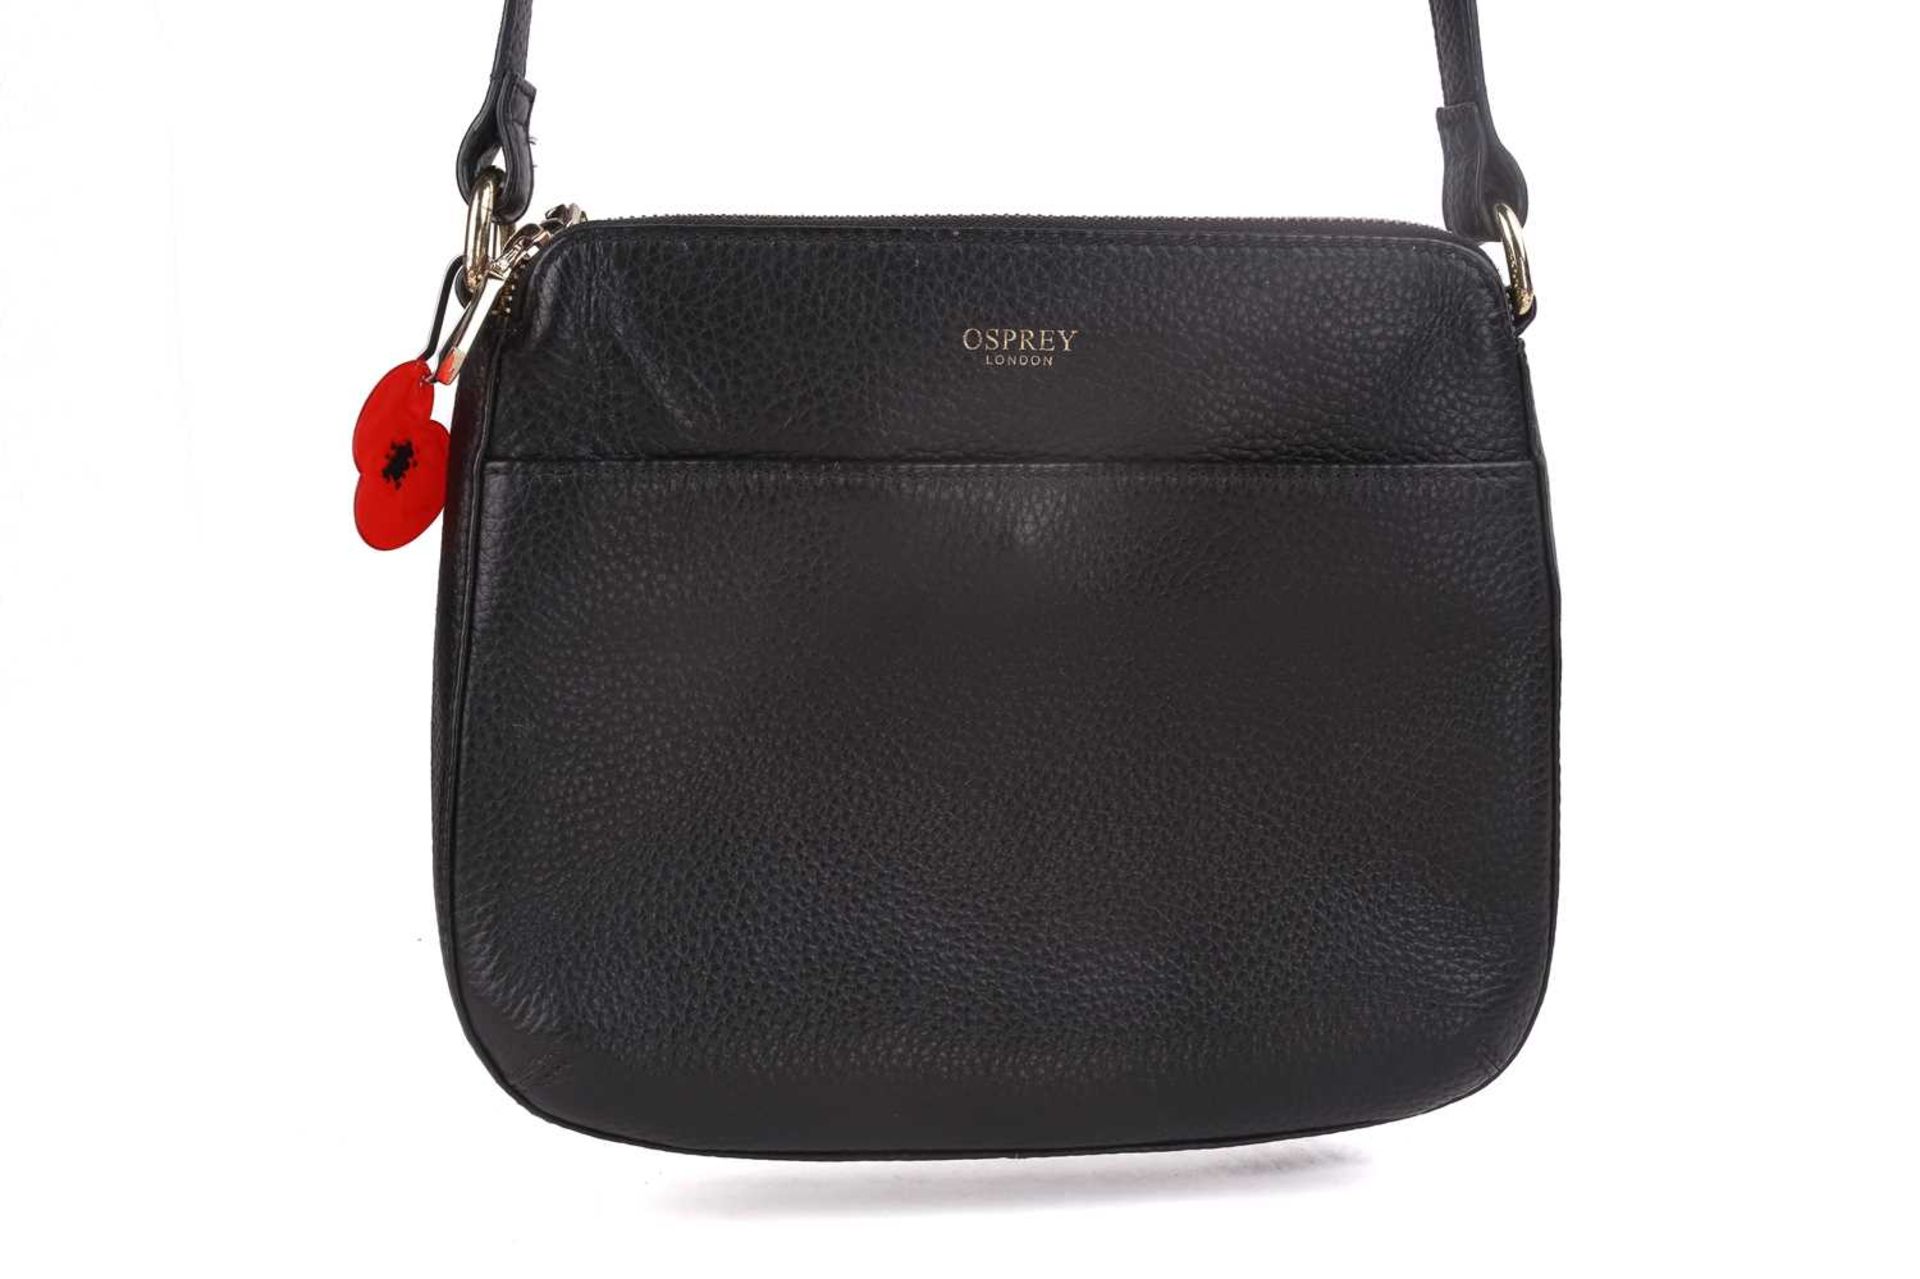 Two Osprey crossbody bags in black leather; one with top zip closure, adjustable crossbody strap, - Image 7 of 12